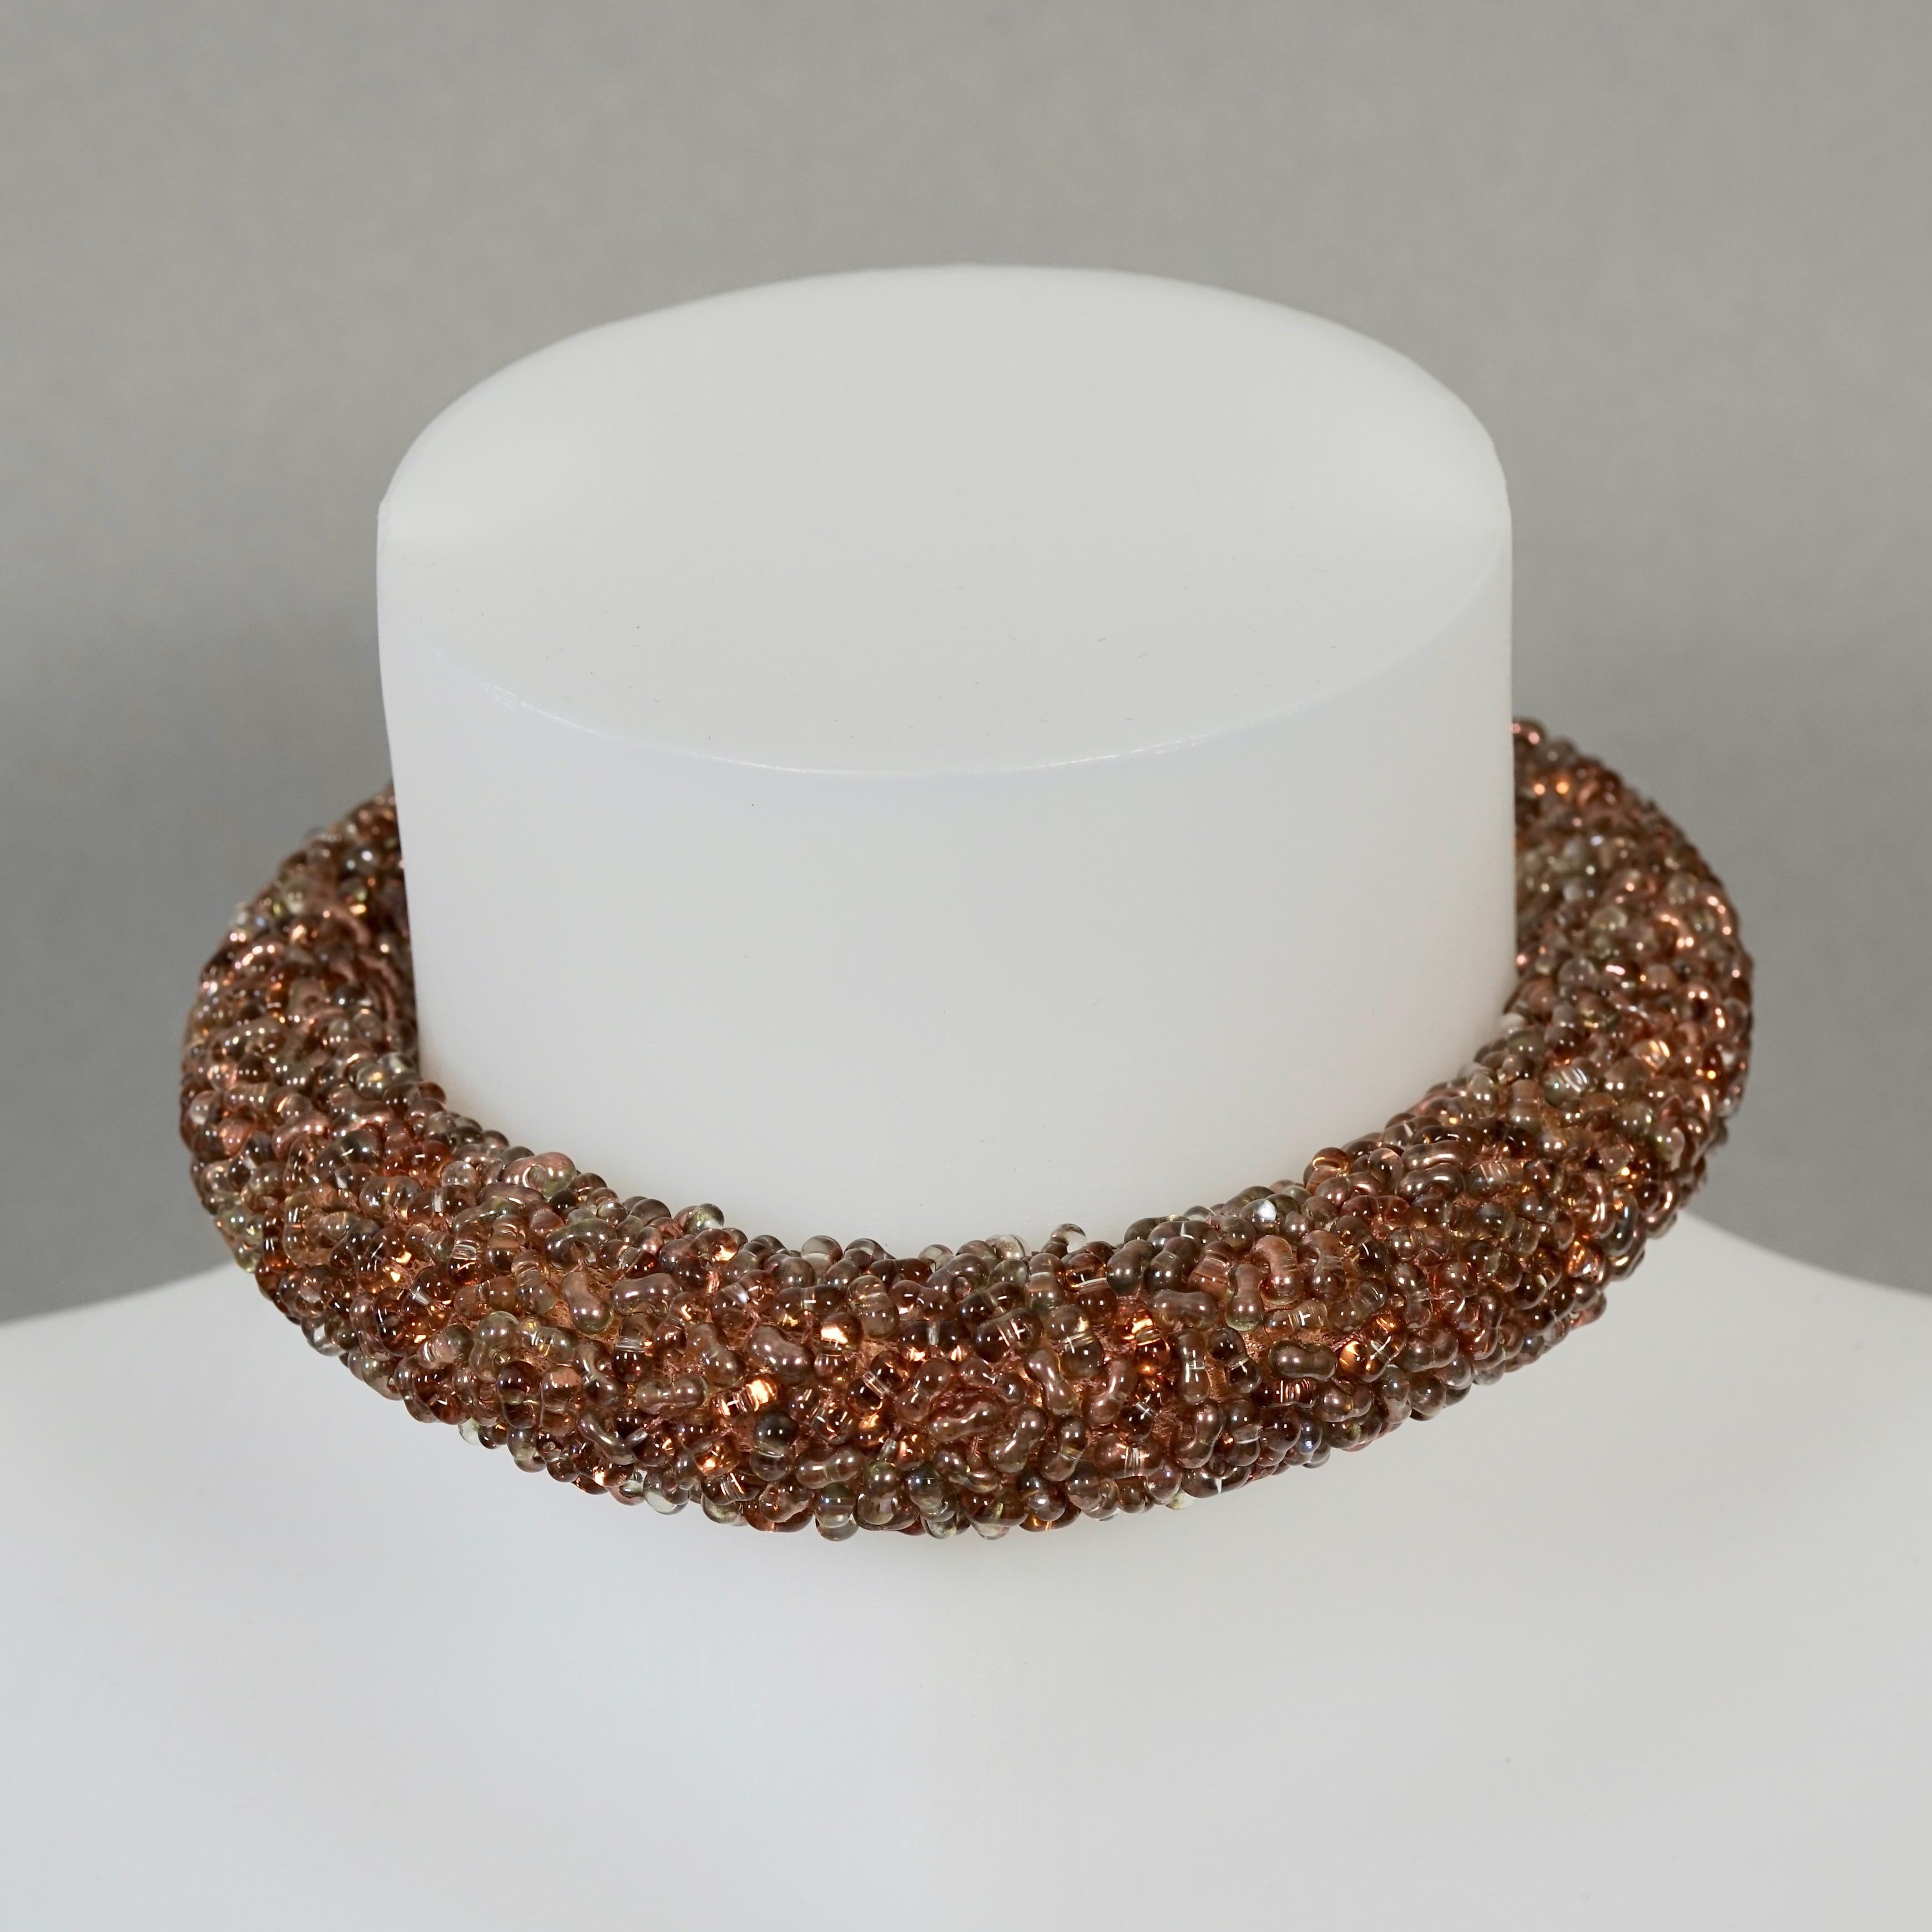 BALENCIAGA 2014 Beaded Bronze Tube Choker Necklace
Alexander Wang's first resort collection.

Measurements:
Thickness: 1.98 inches (2.5 cm)
Wearable Length: 12.20 inches (31 cm)

Features:
- 100% Authentic BALENCIAGA.
- Thick bronze tone tube choker